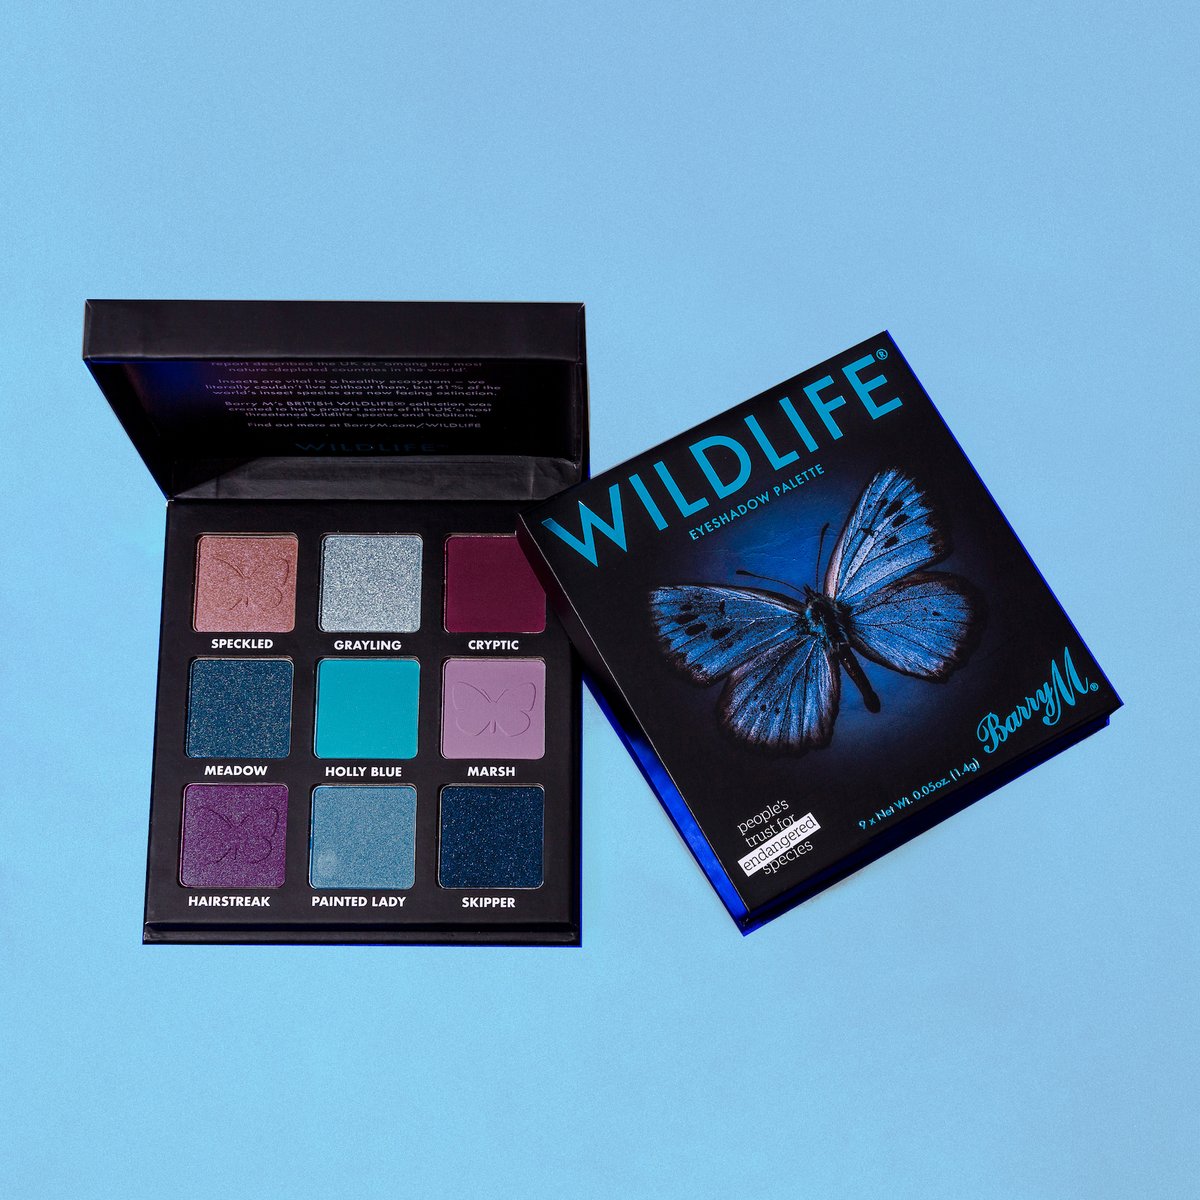 Do you have a butterfly lover in your life? 🦋💜 Barry M’s butterfly palette - with 9 butterfly-inspired colours - would make the perfect gift. 🎁 With every sale, @BarryMCosmetics donates 20% of the profits to our work to protect the habitats butterflies need to survive 🌸🌼